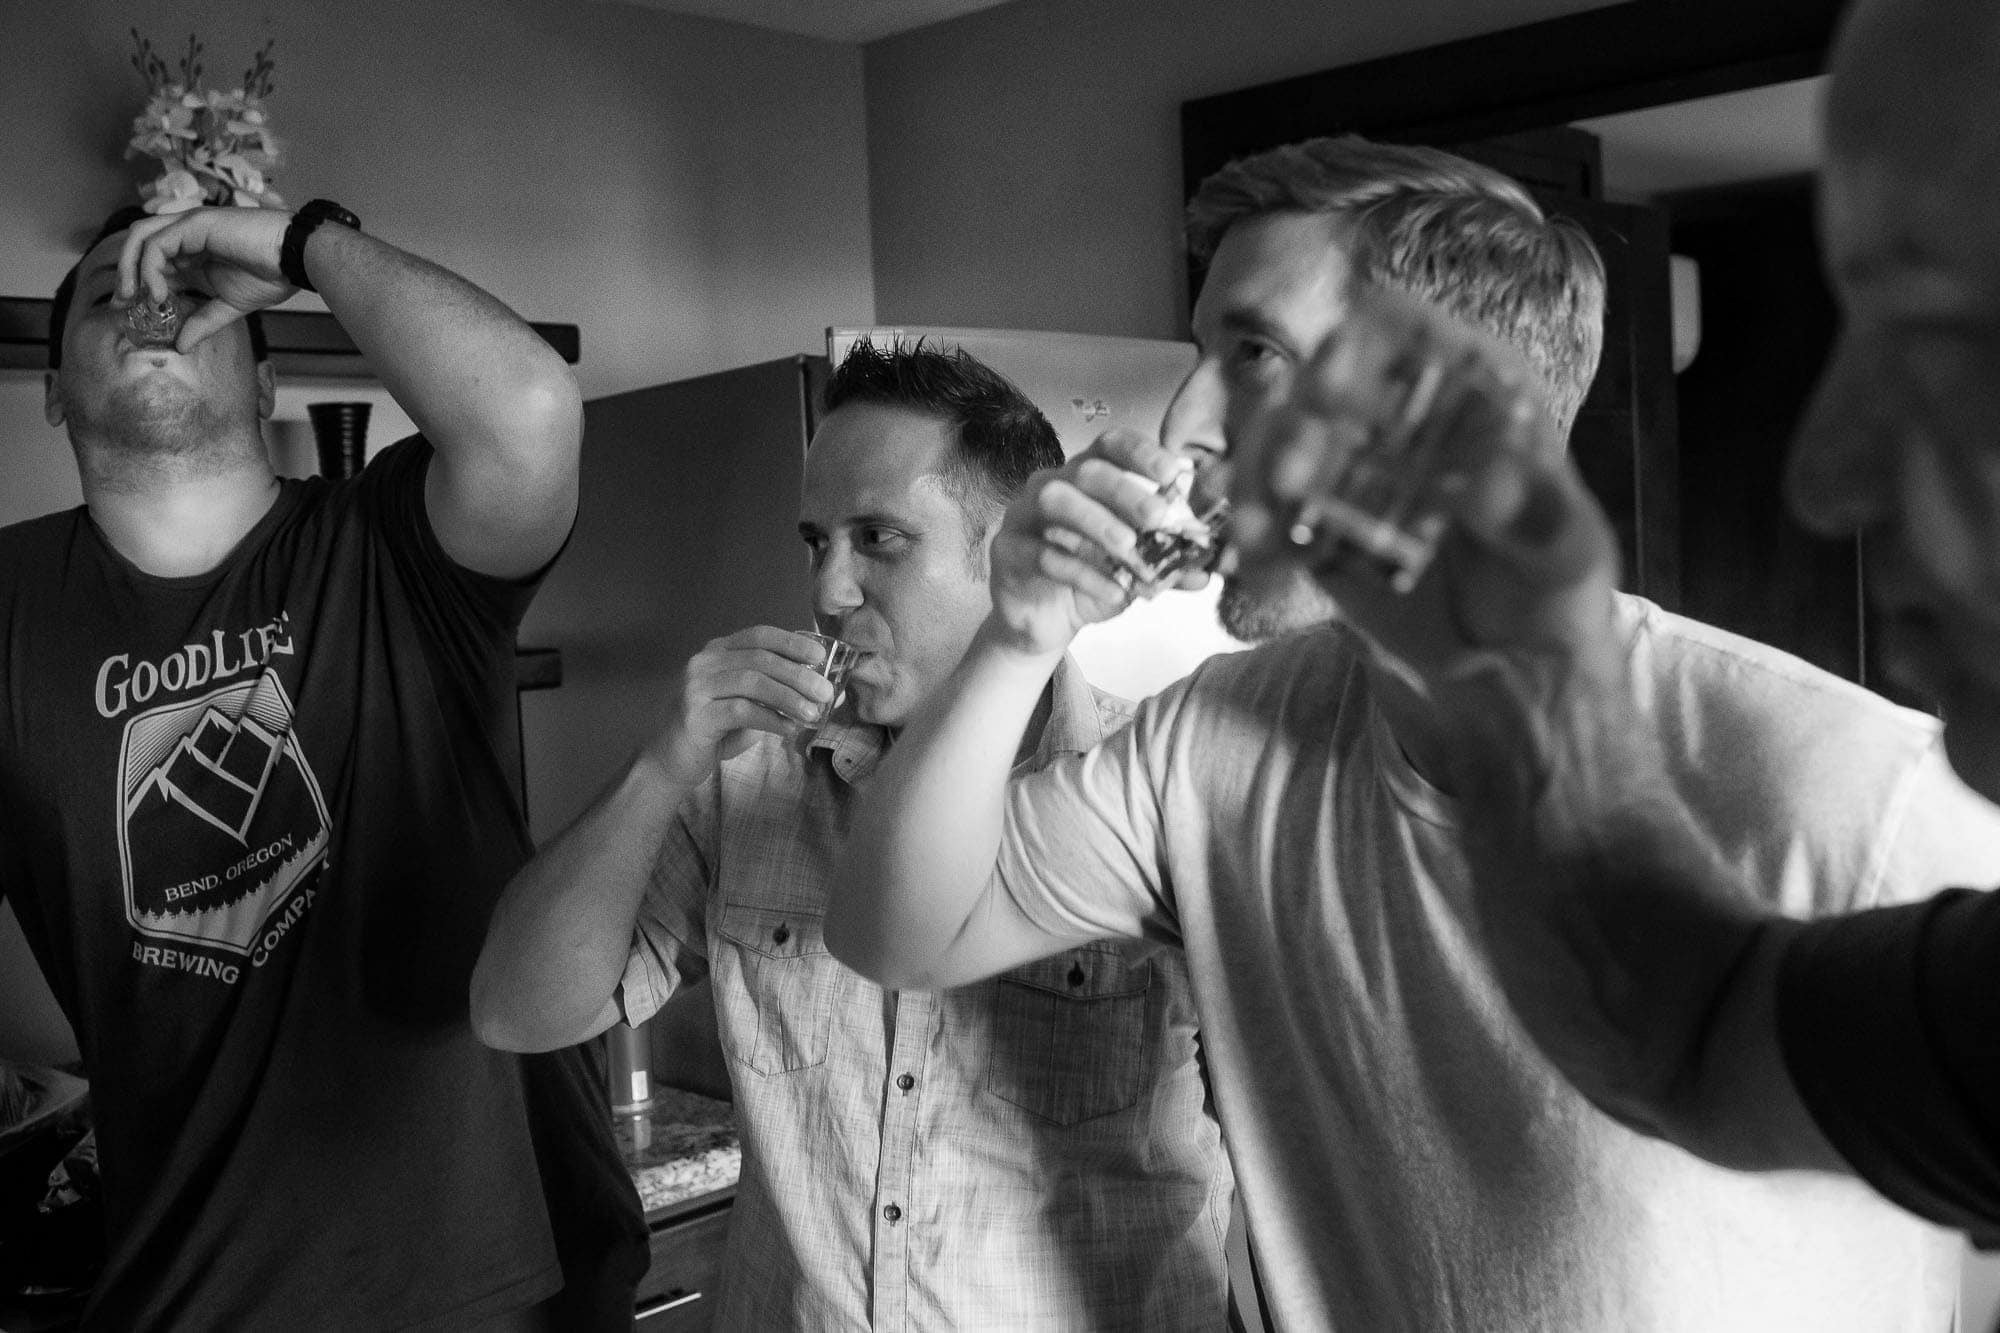 the groom and his buddies taking a shot